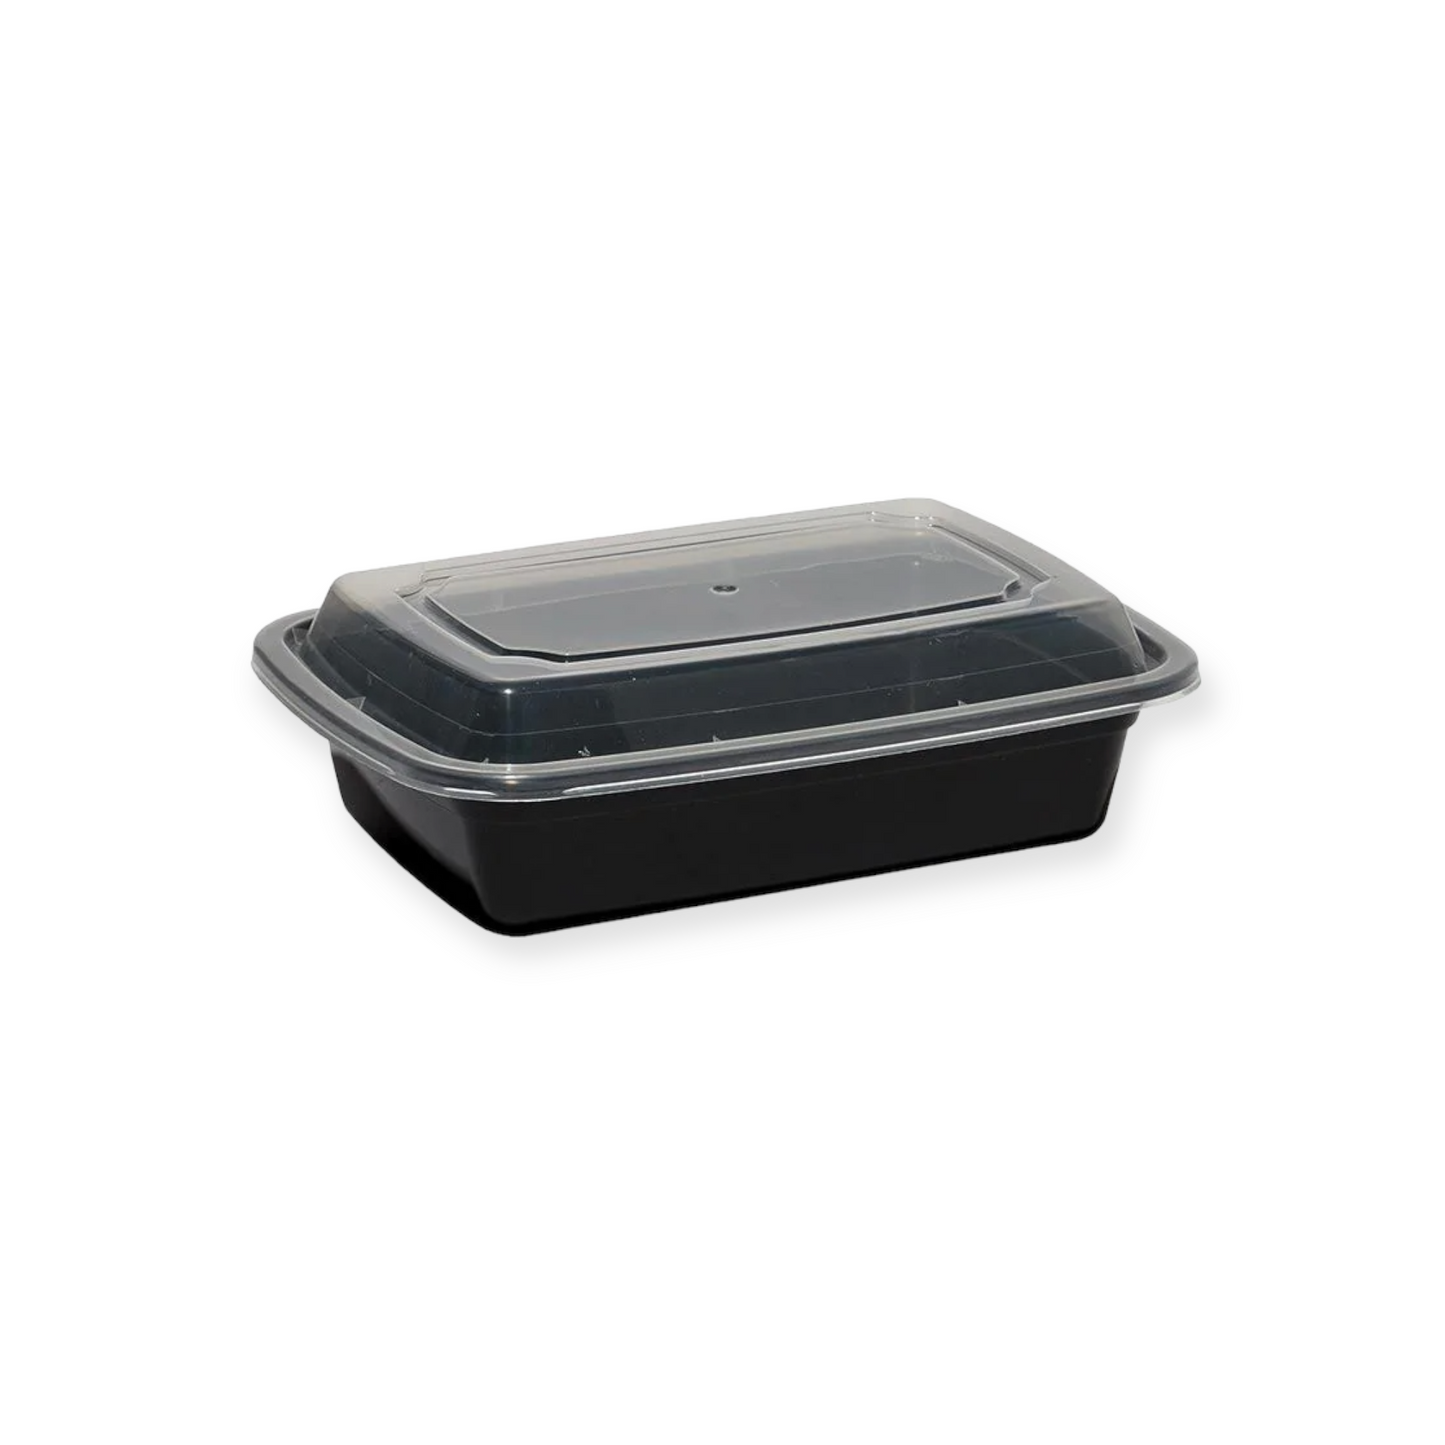 24oz. Black Rectangular Micro Carryout Containers with Lids 150 Sets